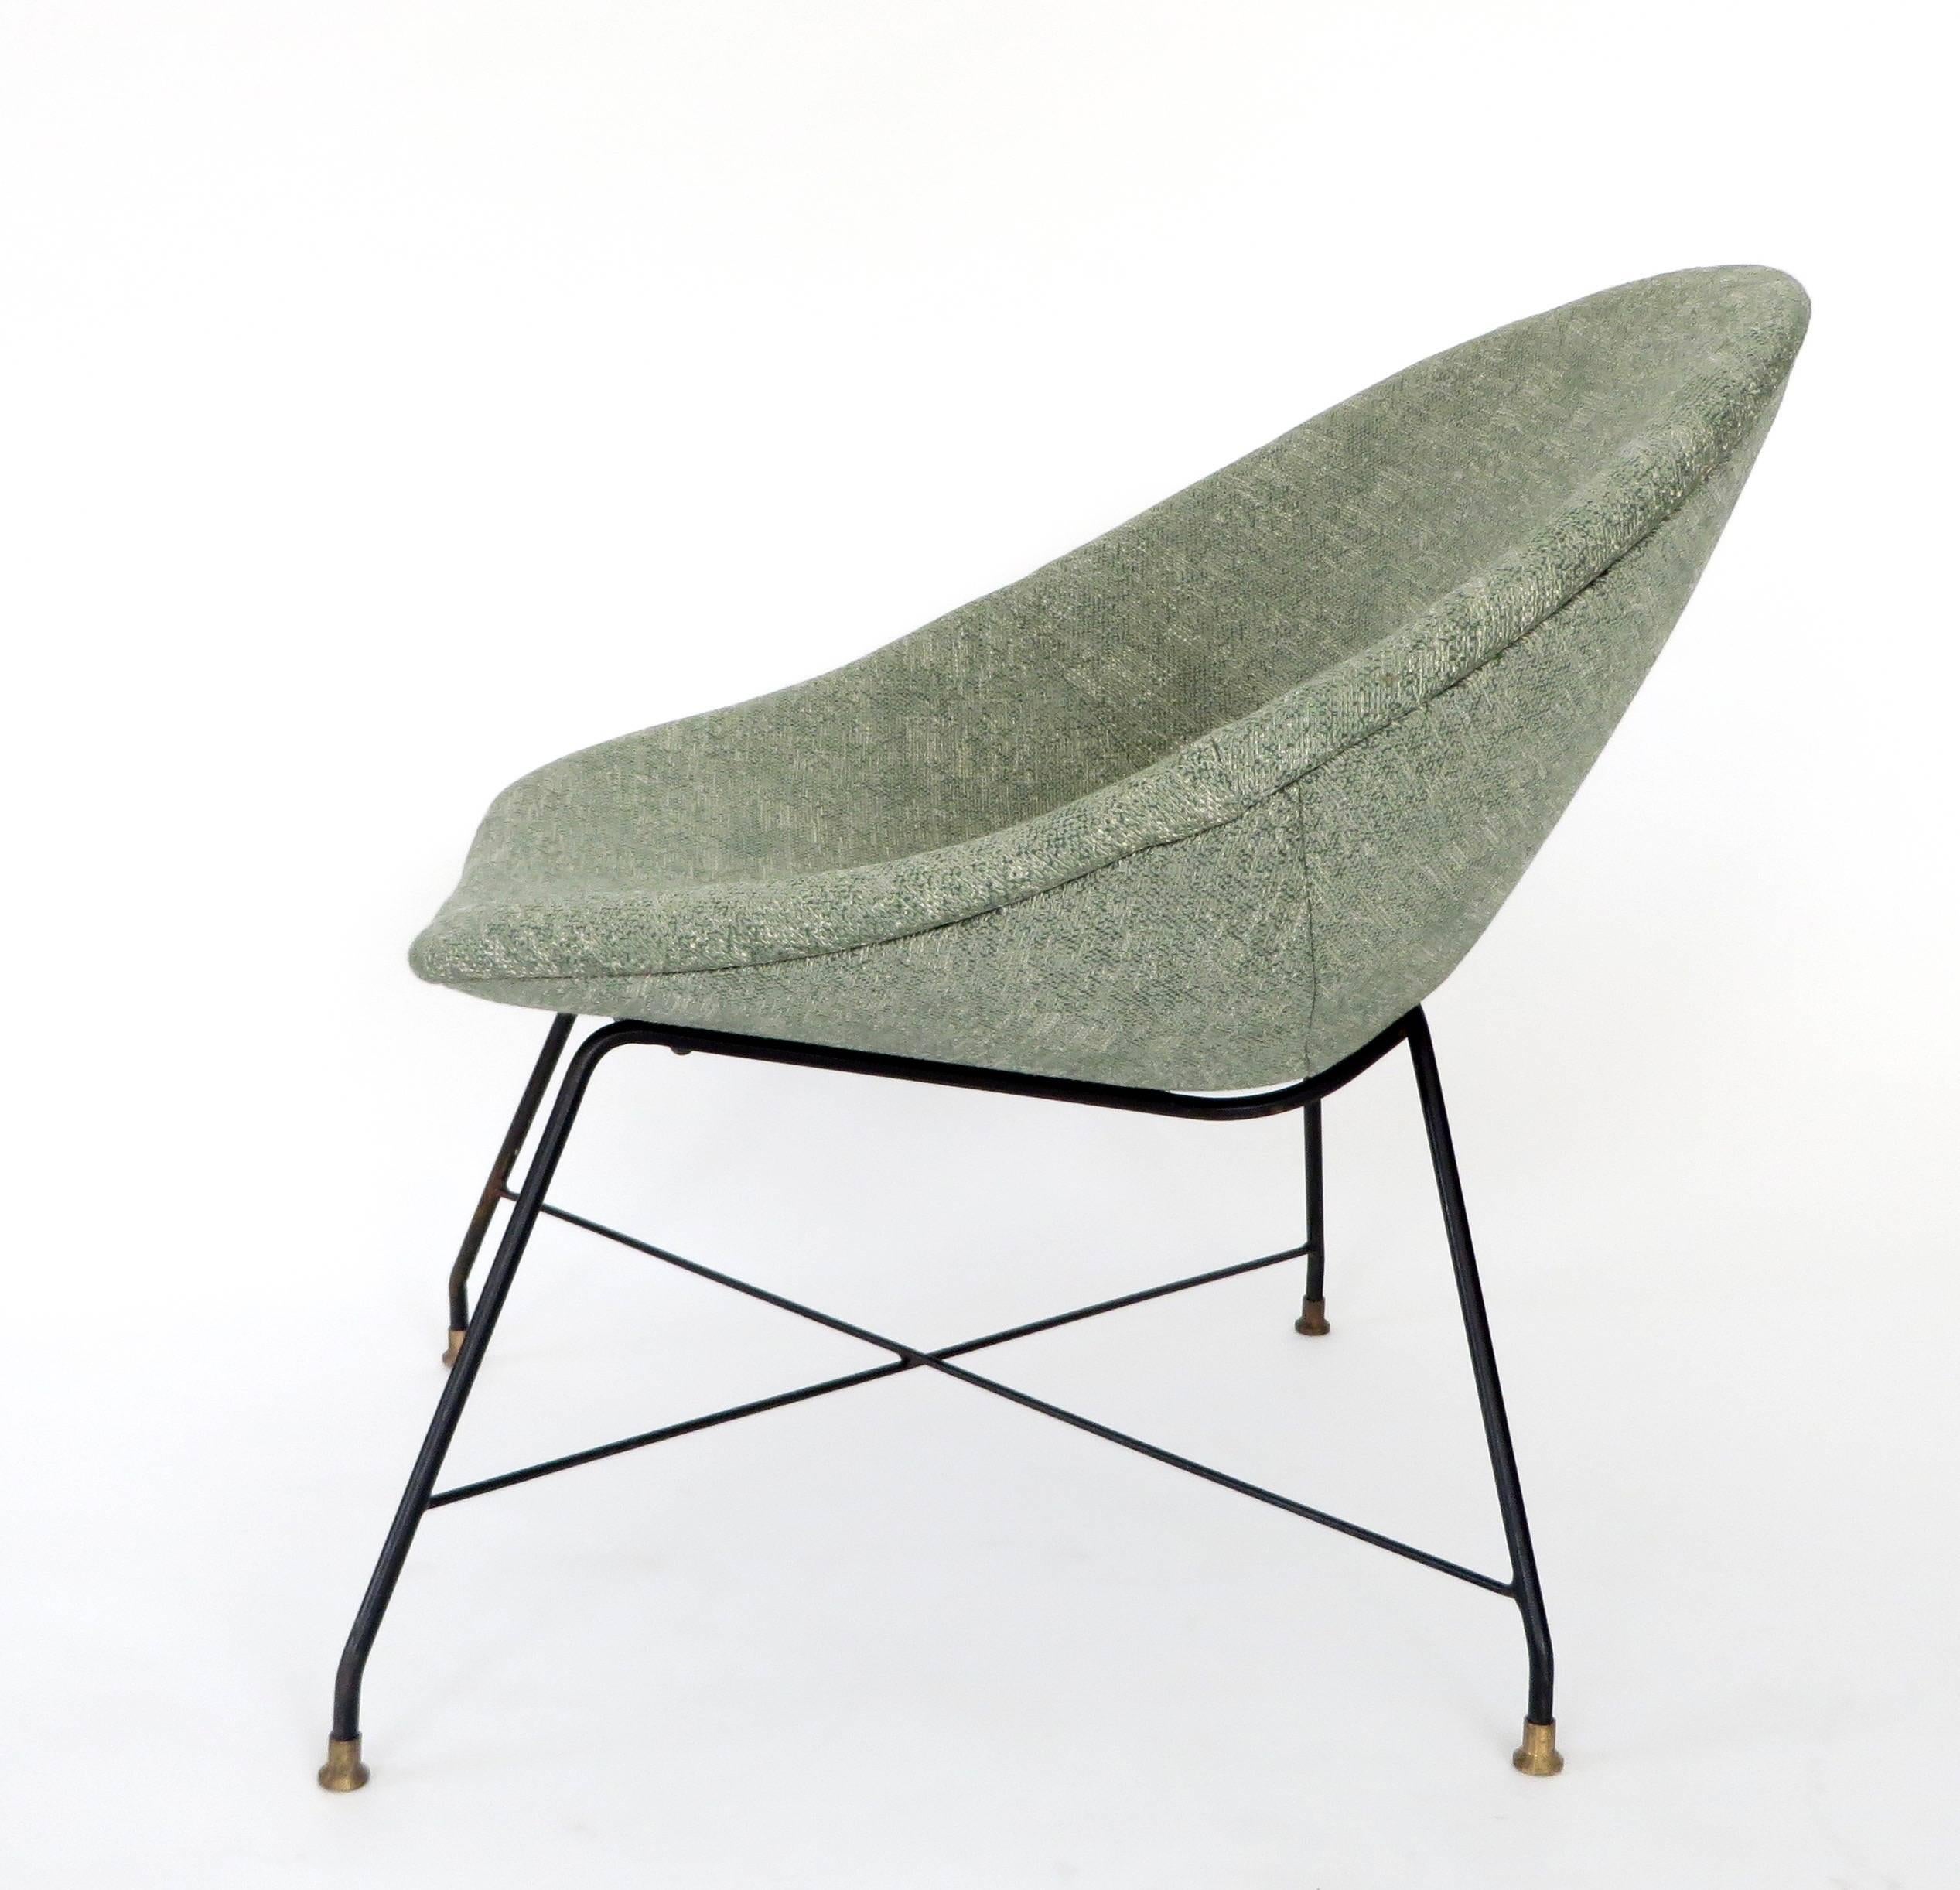 A pair of lounge chairs designed by Augusto Bozzi for Saporiti Italia, Italy, 1954. These chairs have a black lacquered metal wire frame with solid brass feet. The chairs are newly upholstered in a grass green linen and are in excellent condition.